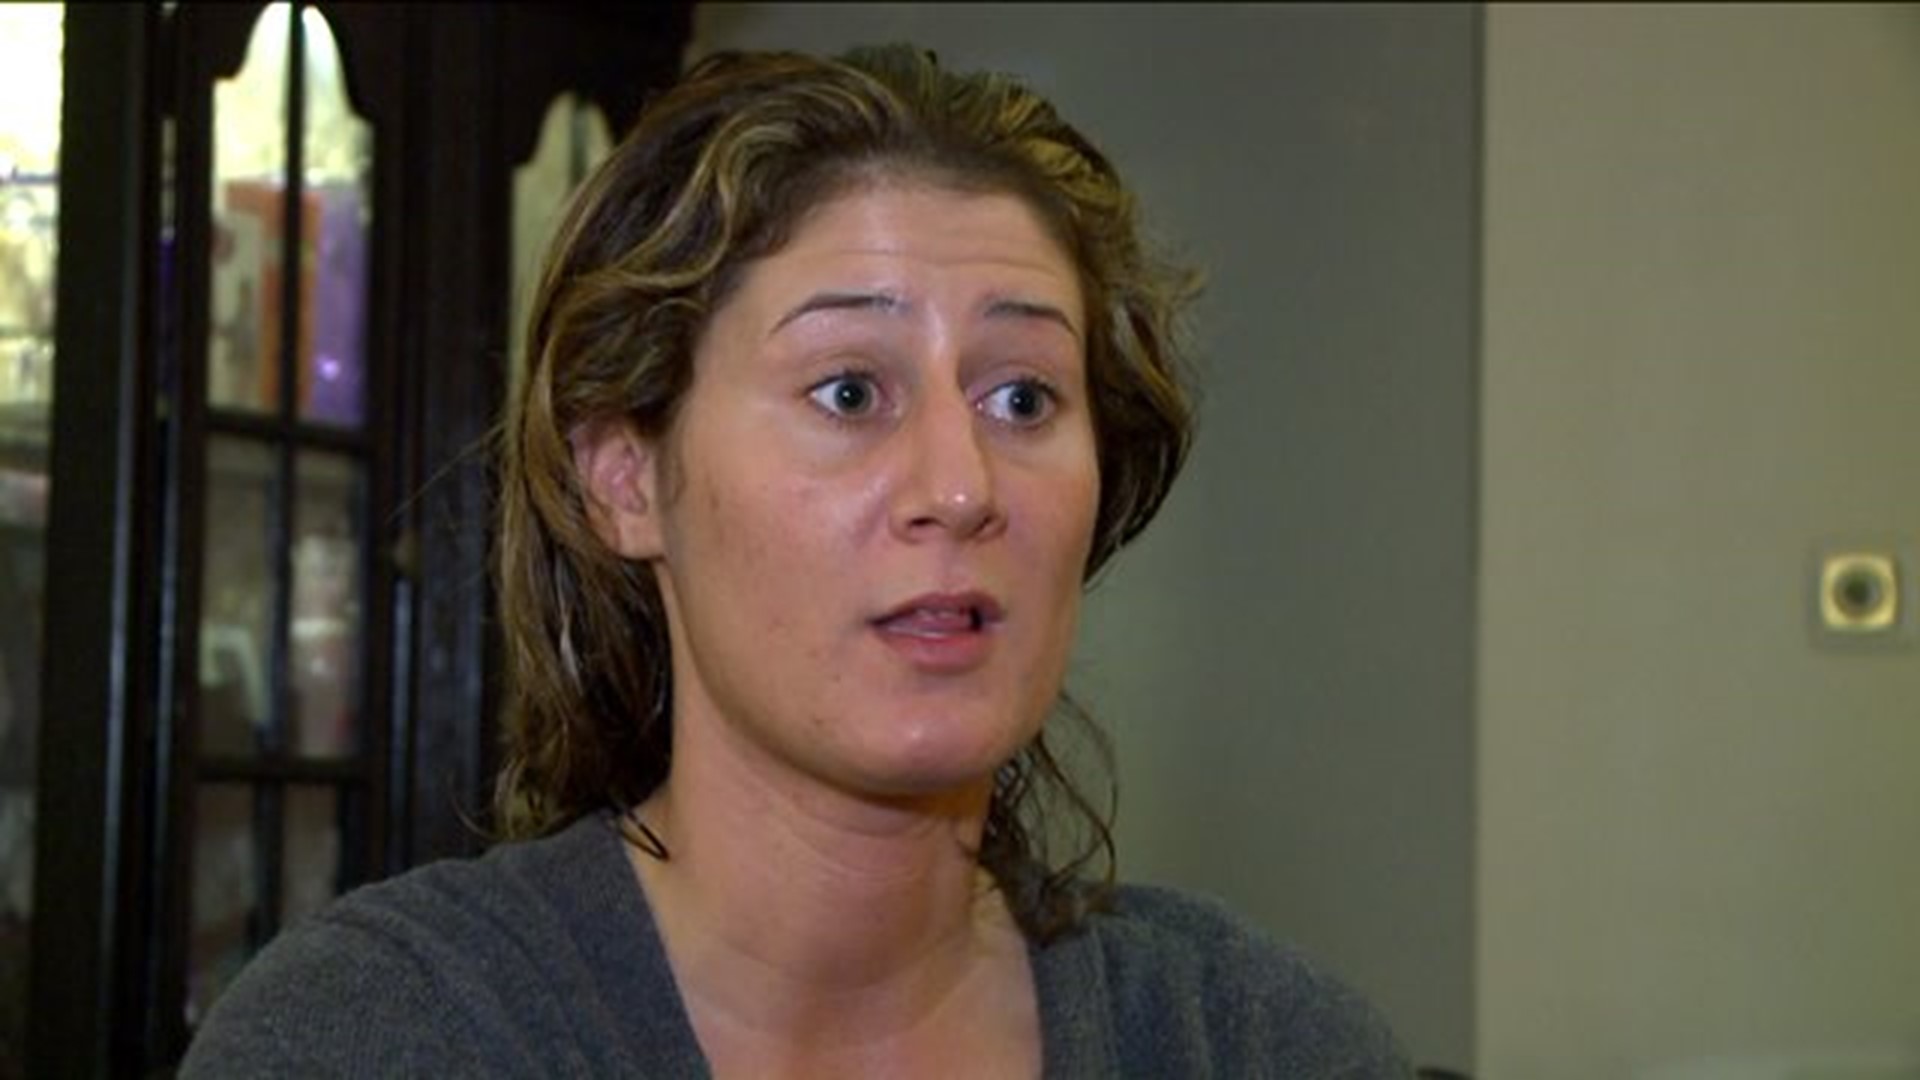 Mother of 3-year-old child locked in day care demands answers